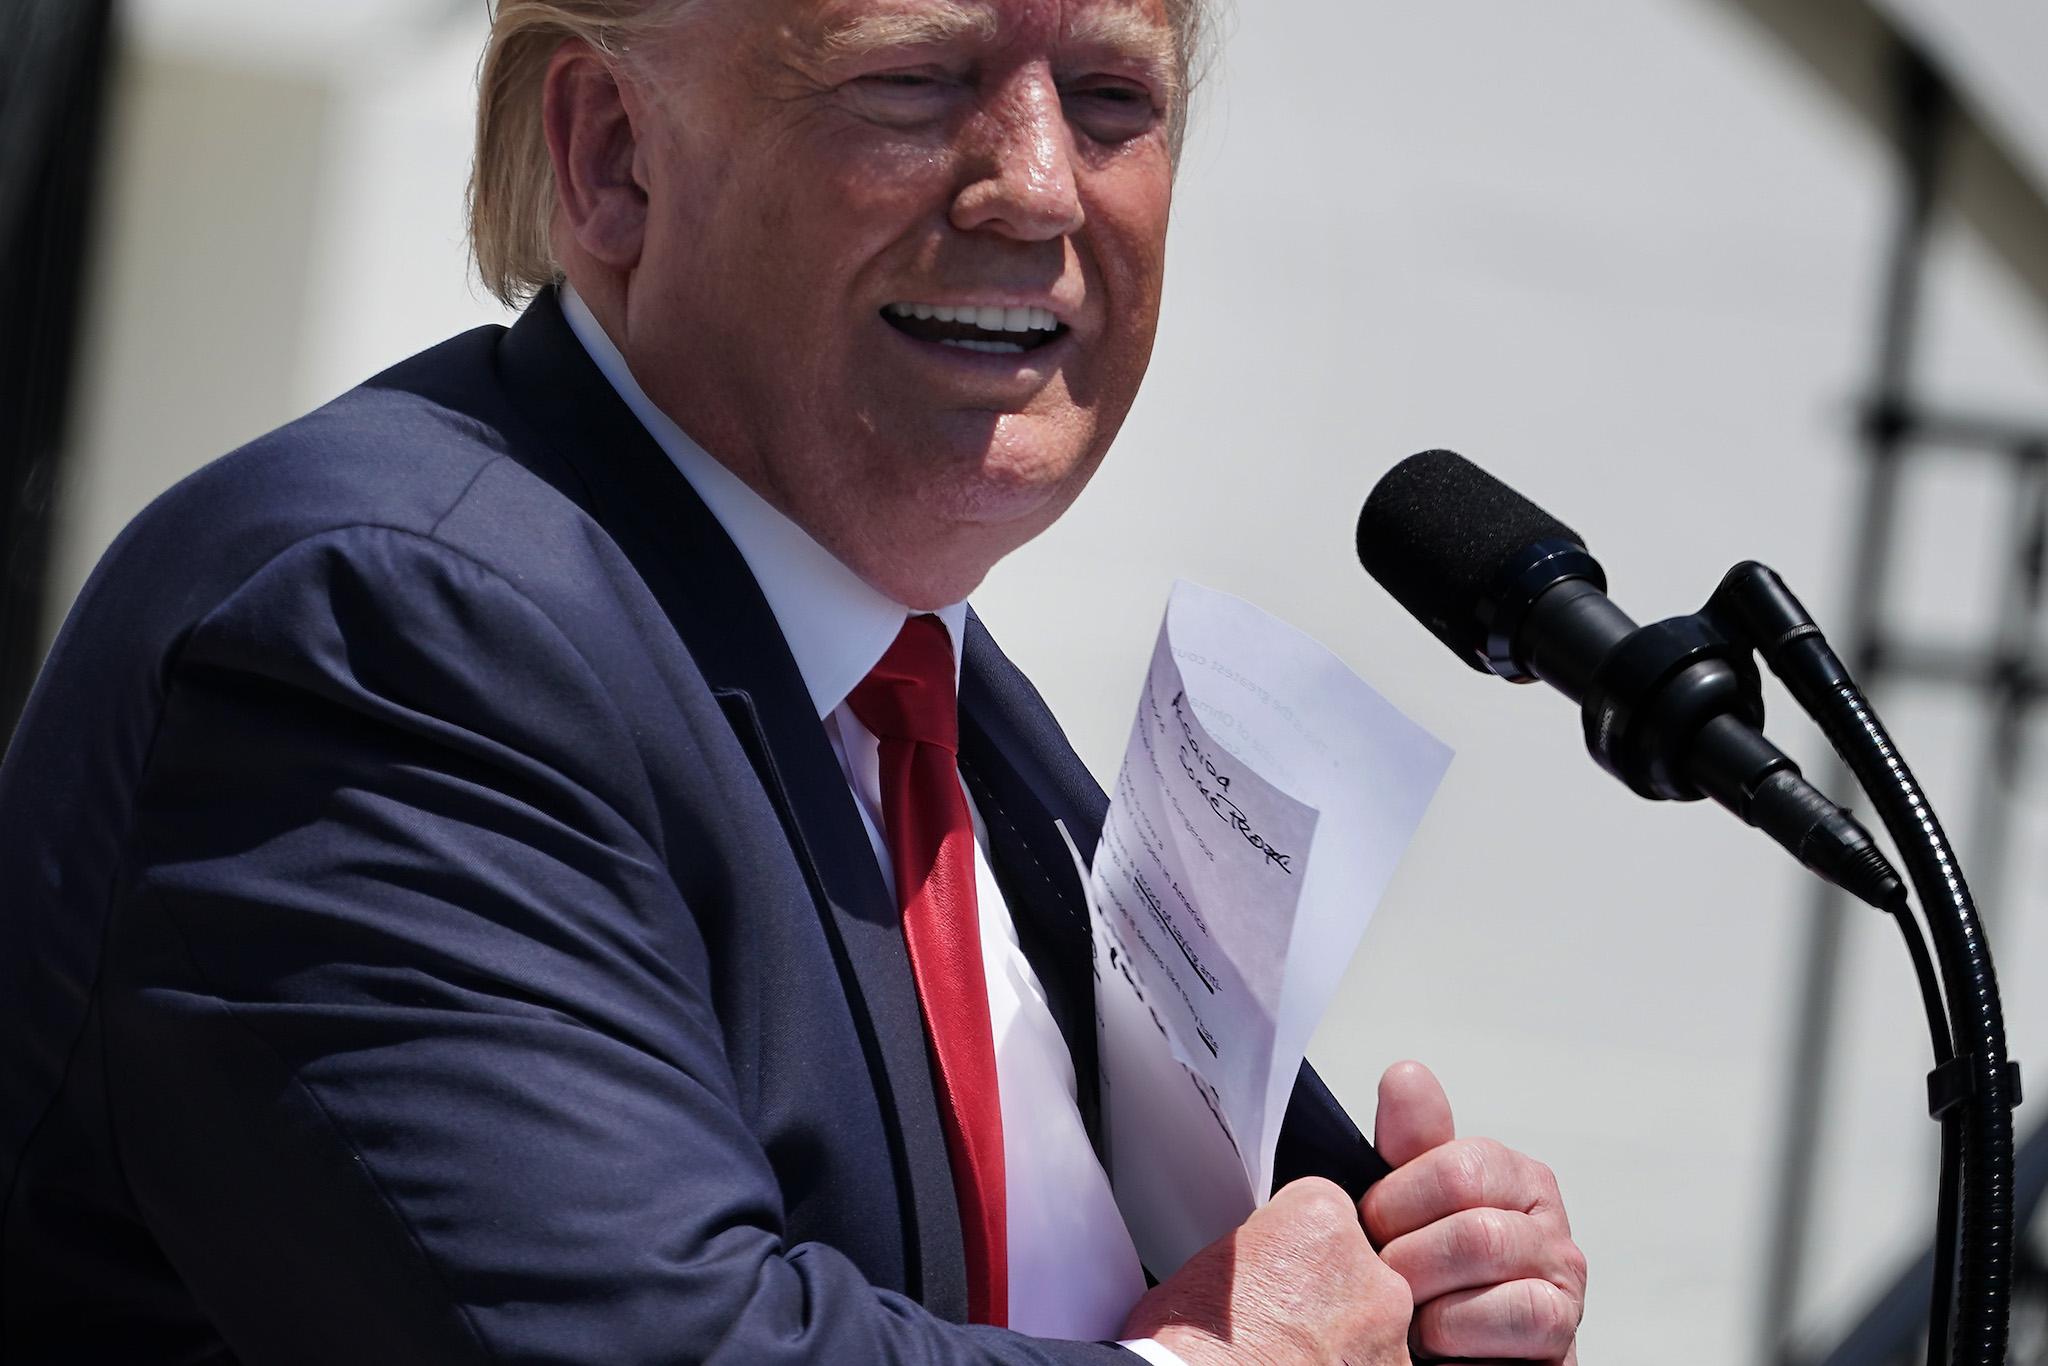 U.S. President Donald Trump puts away his notes after addressing his Made In America product showcase at the White House July 15, 2019 in Washington, DC